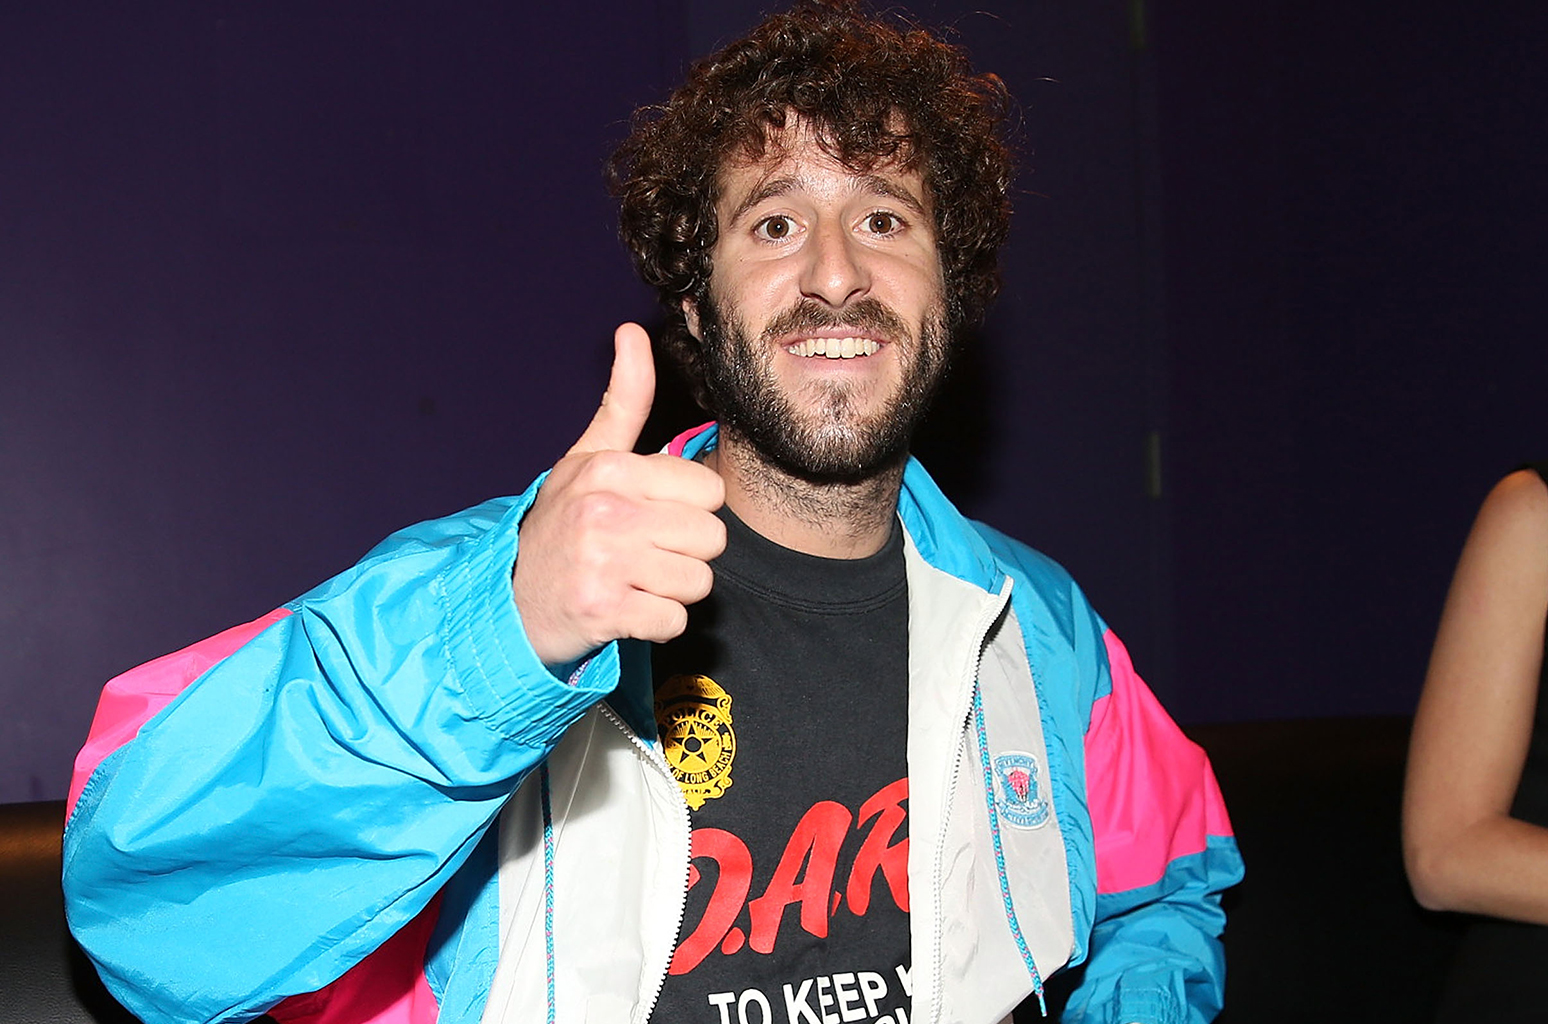 Lil Dicky smiling and doing a like sign in his hand